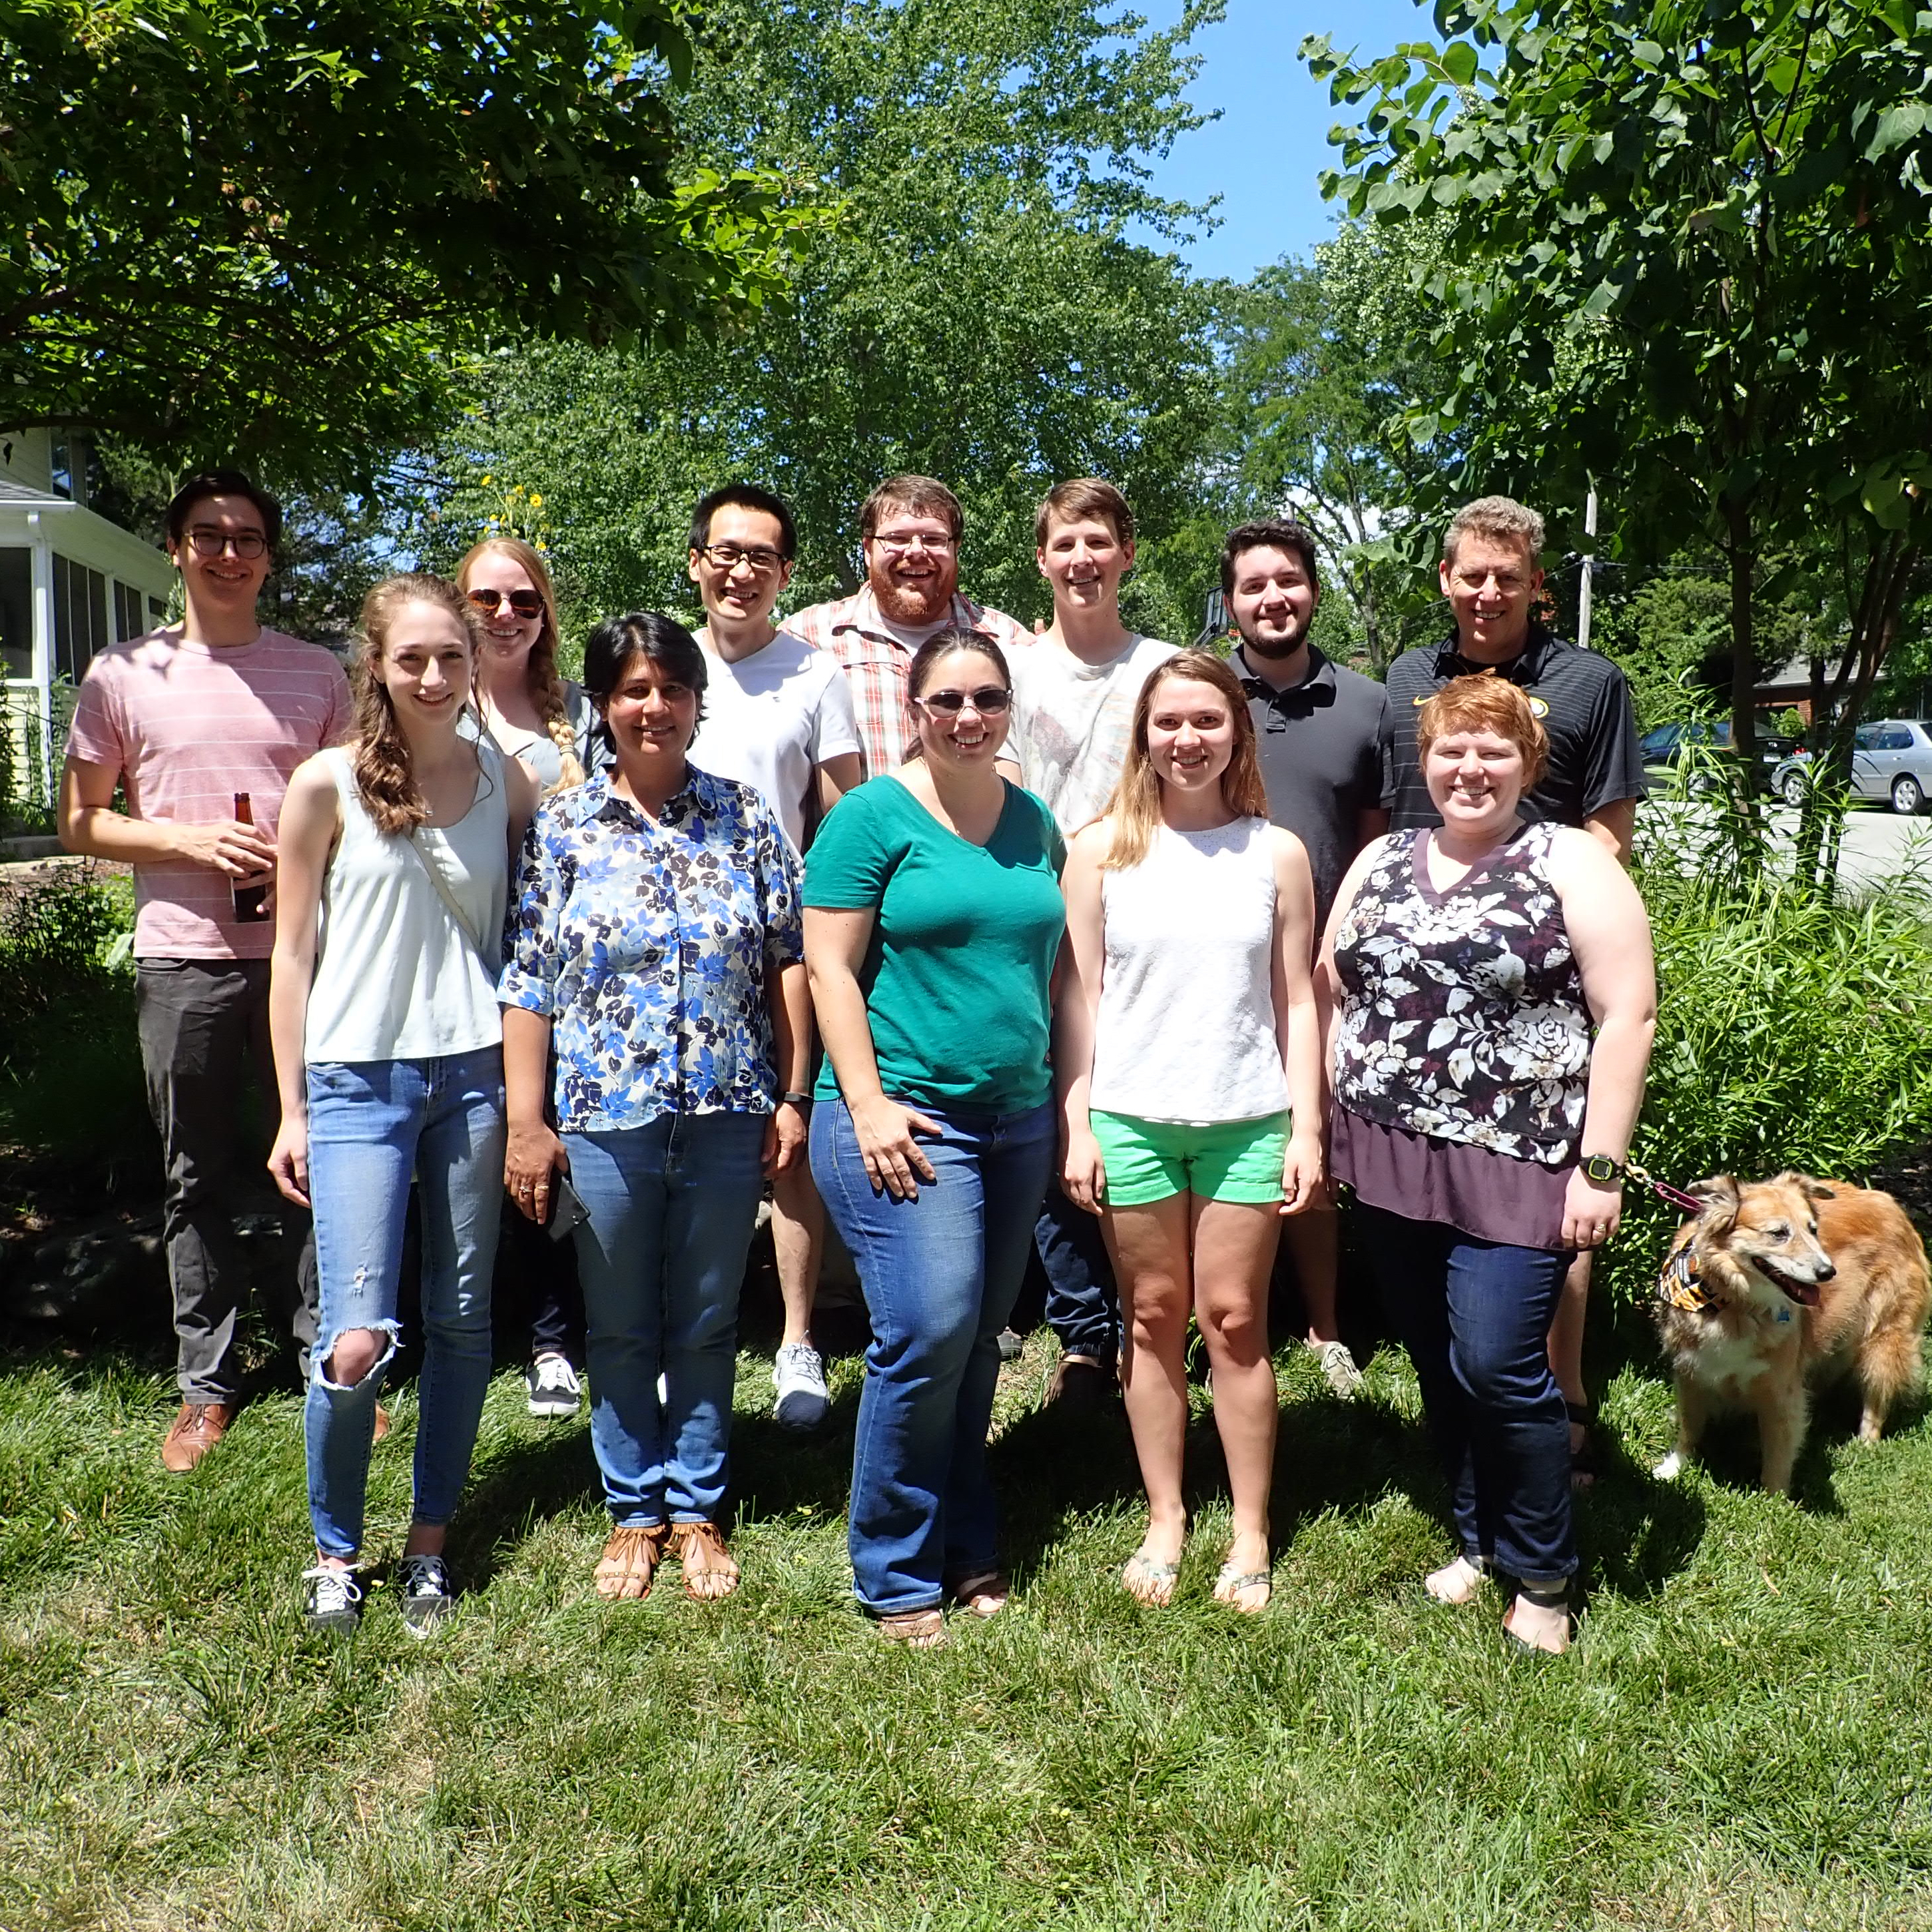 Group photo of the Pire's lab, including Chris's dog Trixie.